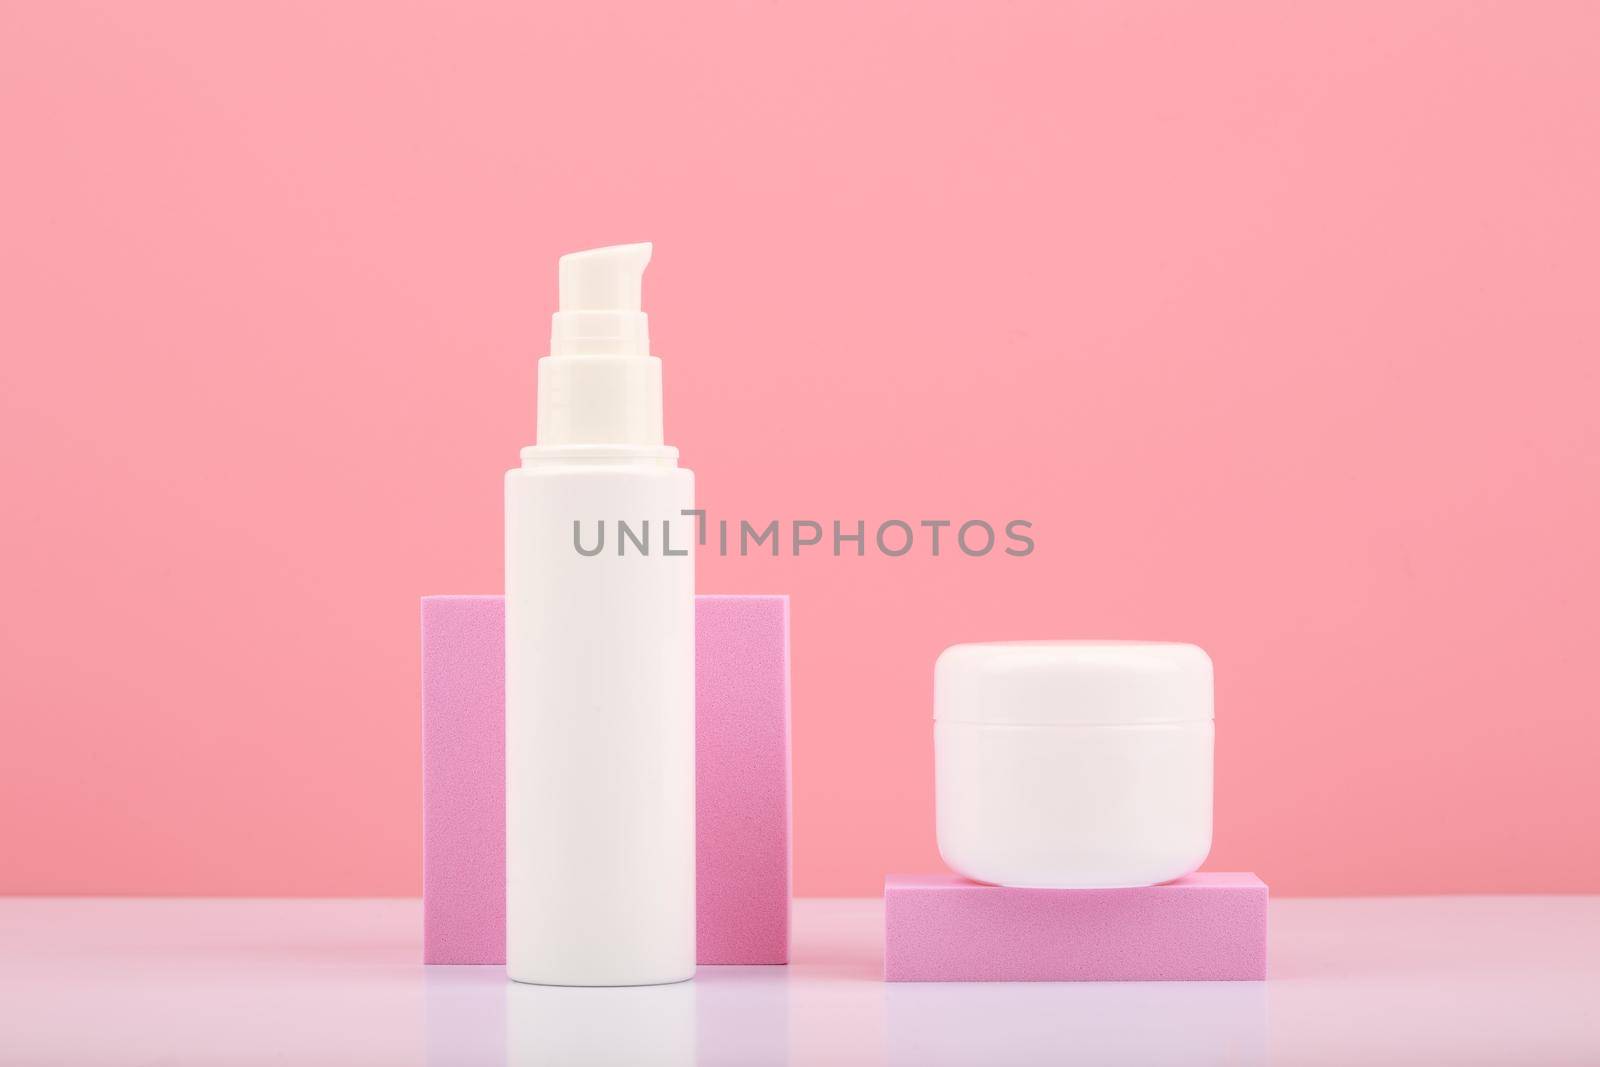 Skin lotion and under eye gel with pink geometric props against pink background by Senorina_Irina